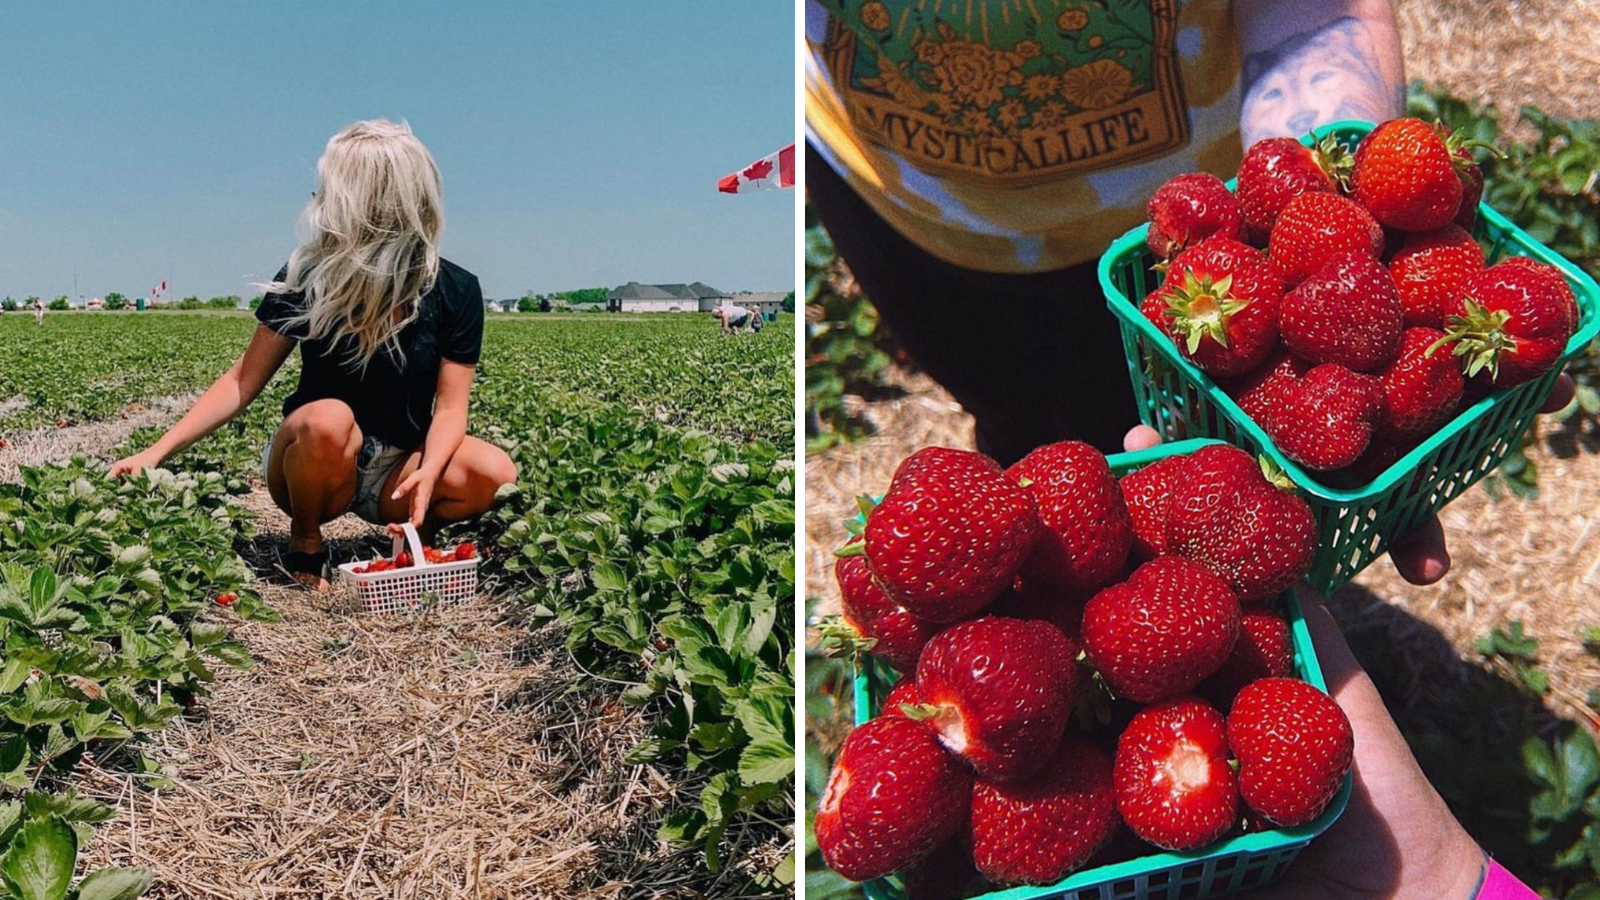 Collage of images including a person in a field picking strawberries and an aerial image of two strawberry baskets being held by two people